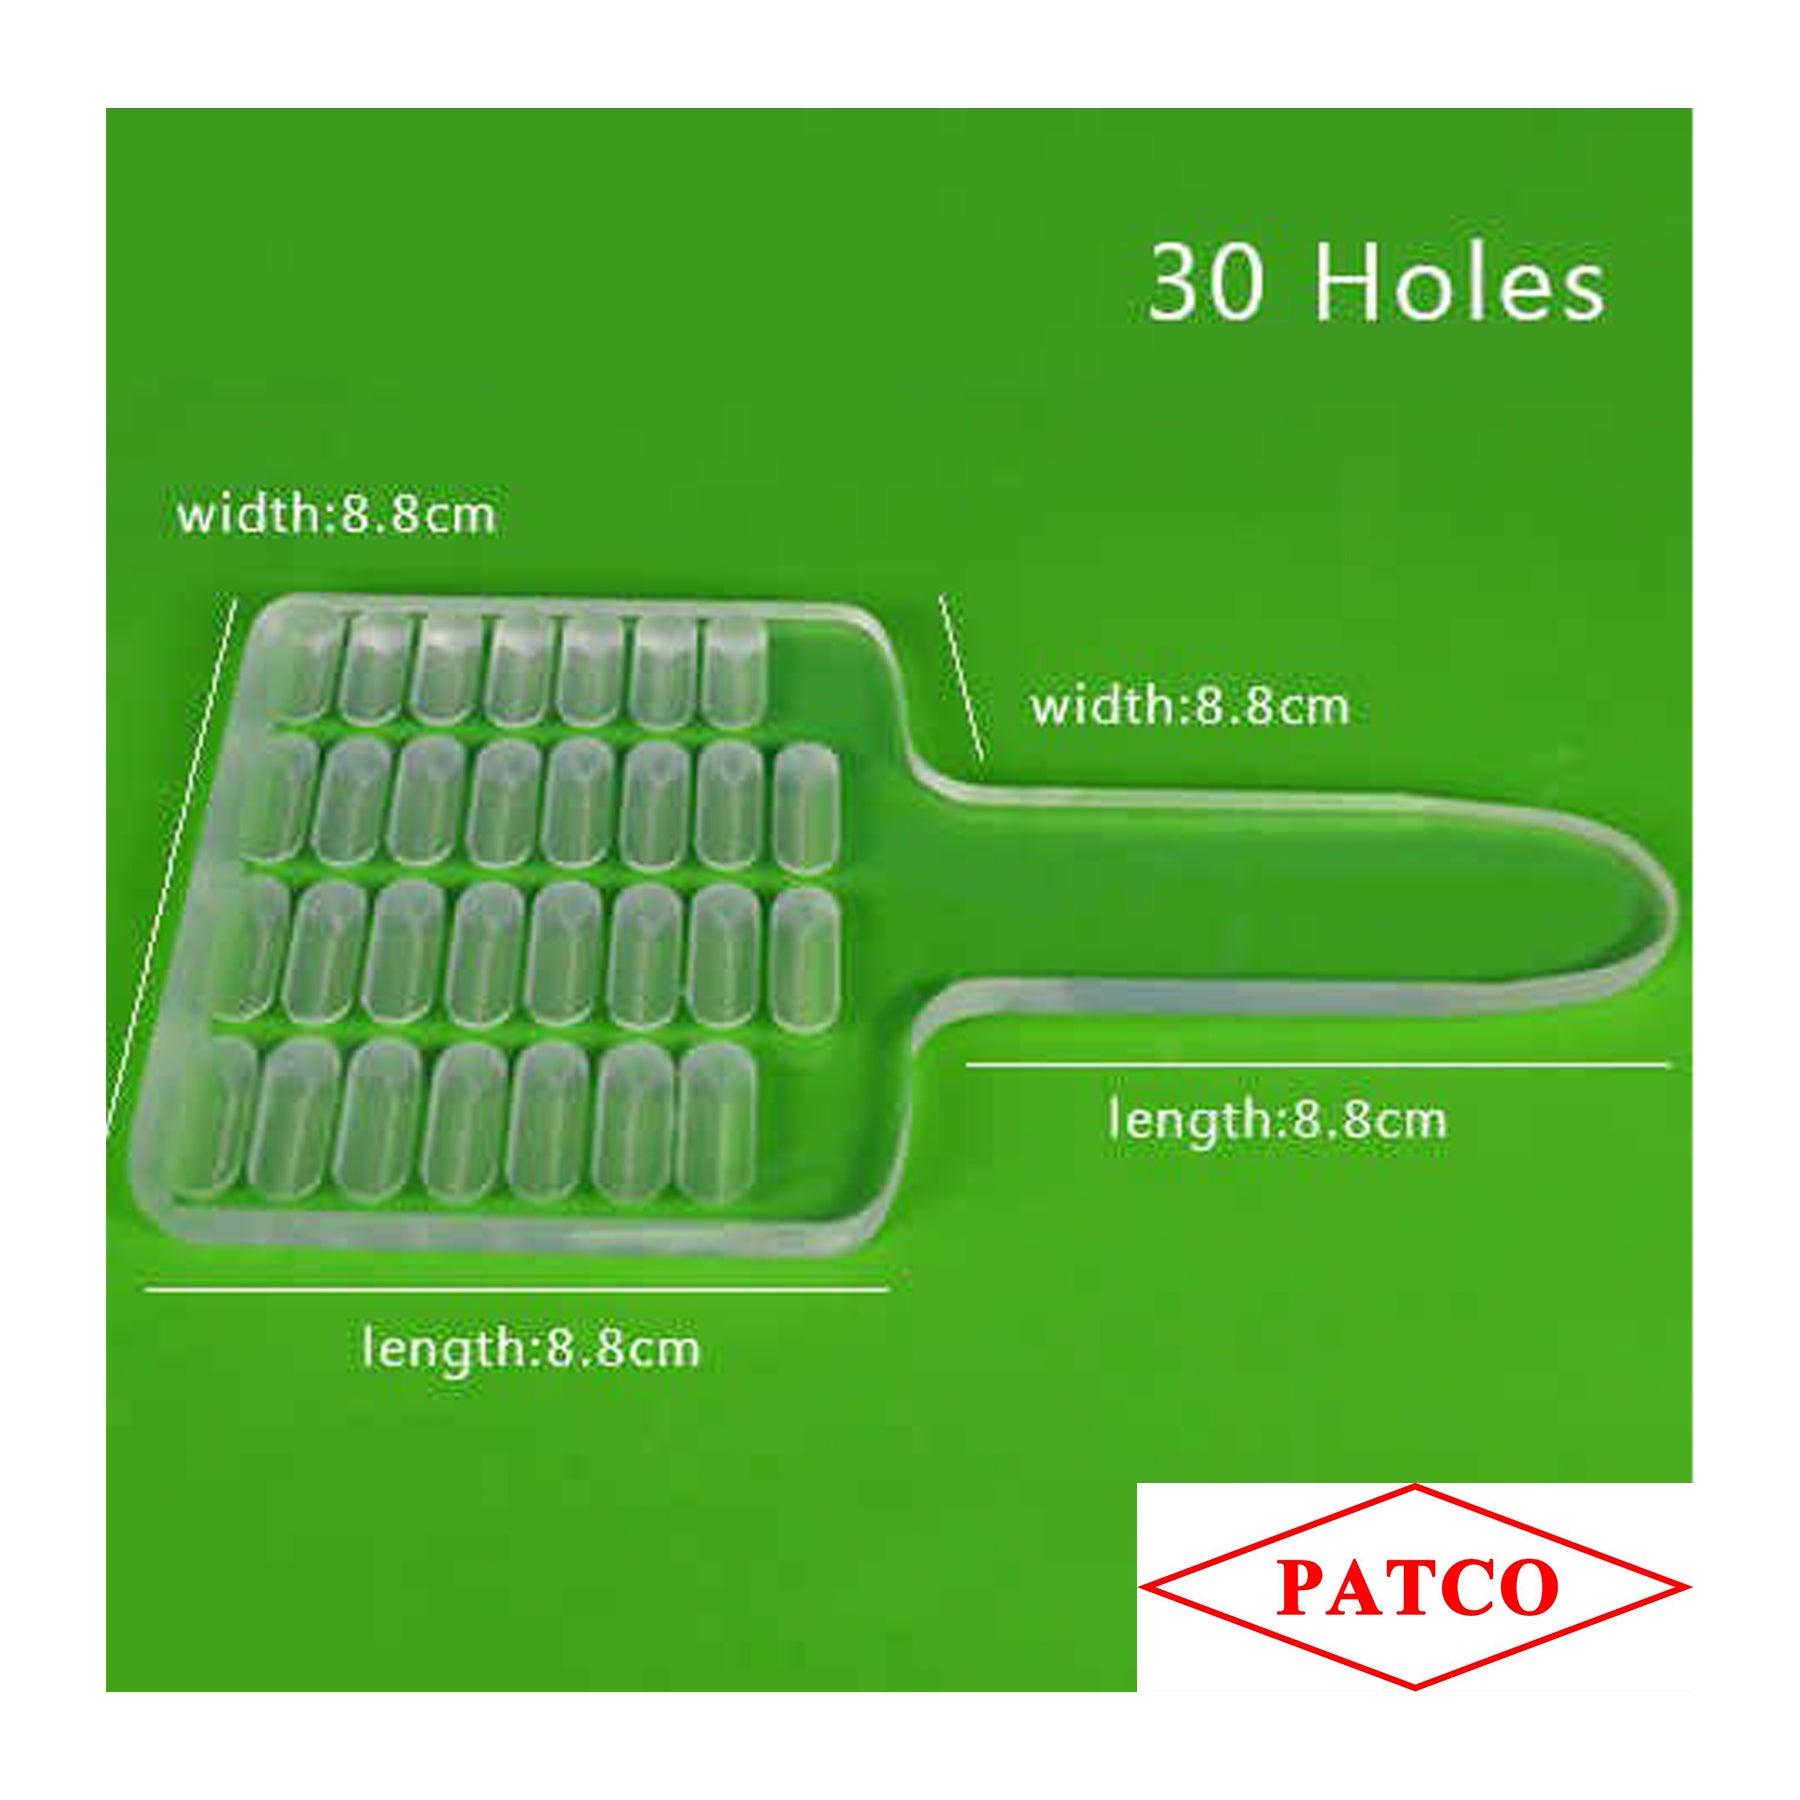 Manual Capsule Counter Count Board/Tray For Size 00 Capsule (30 Holes Capsule Counter) Patco Pharma